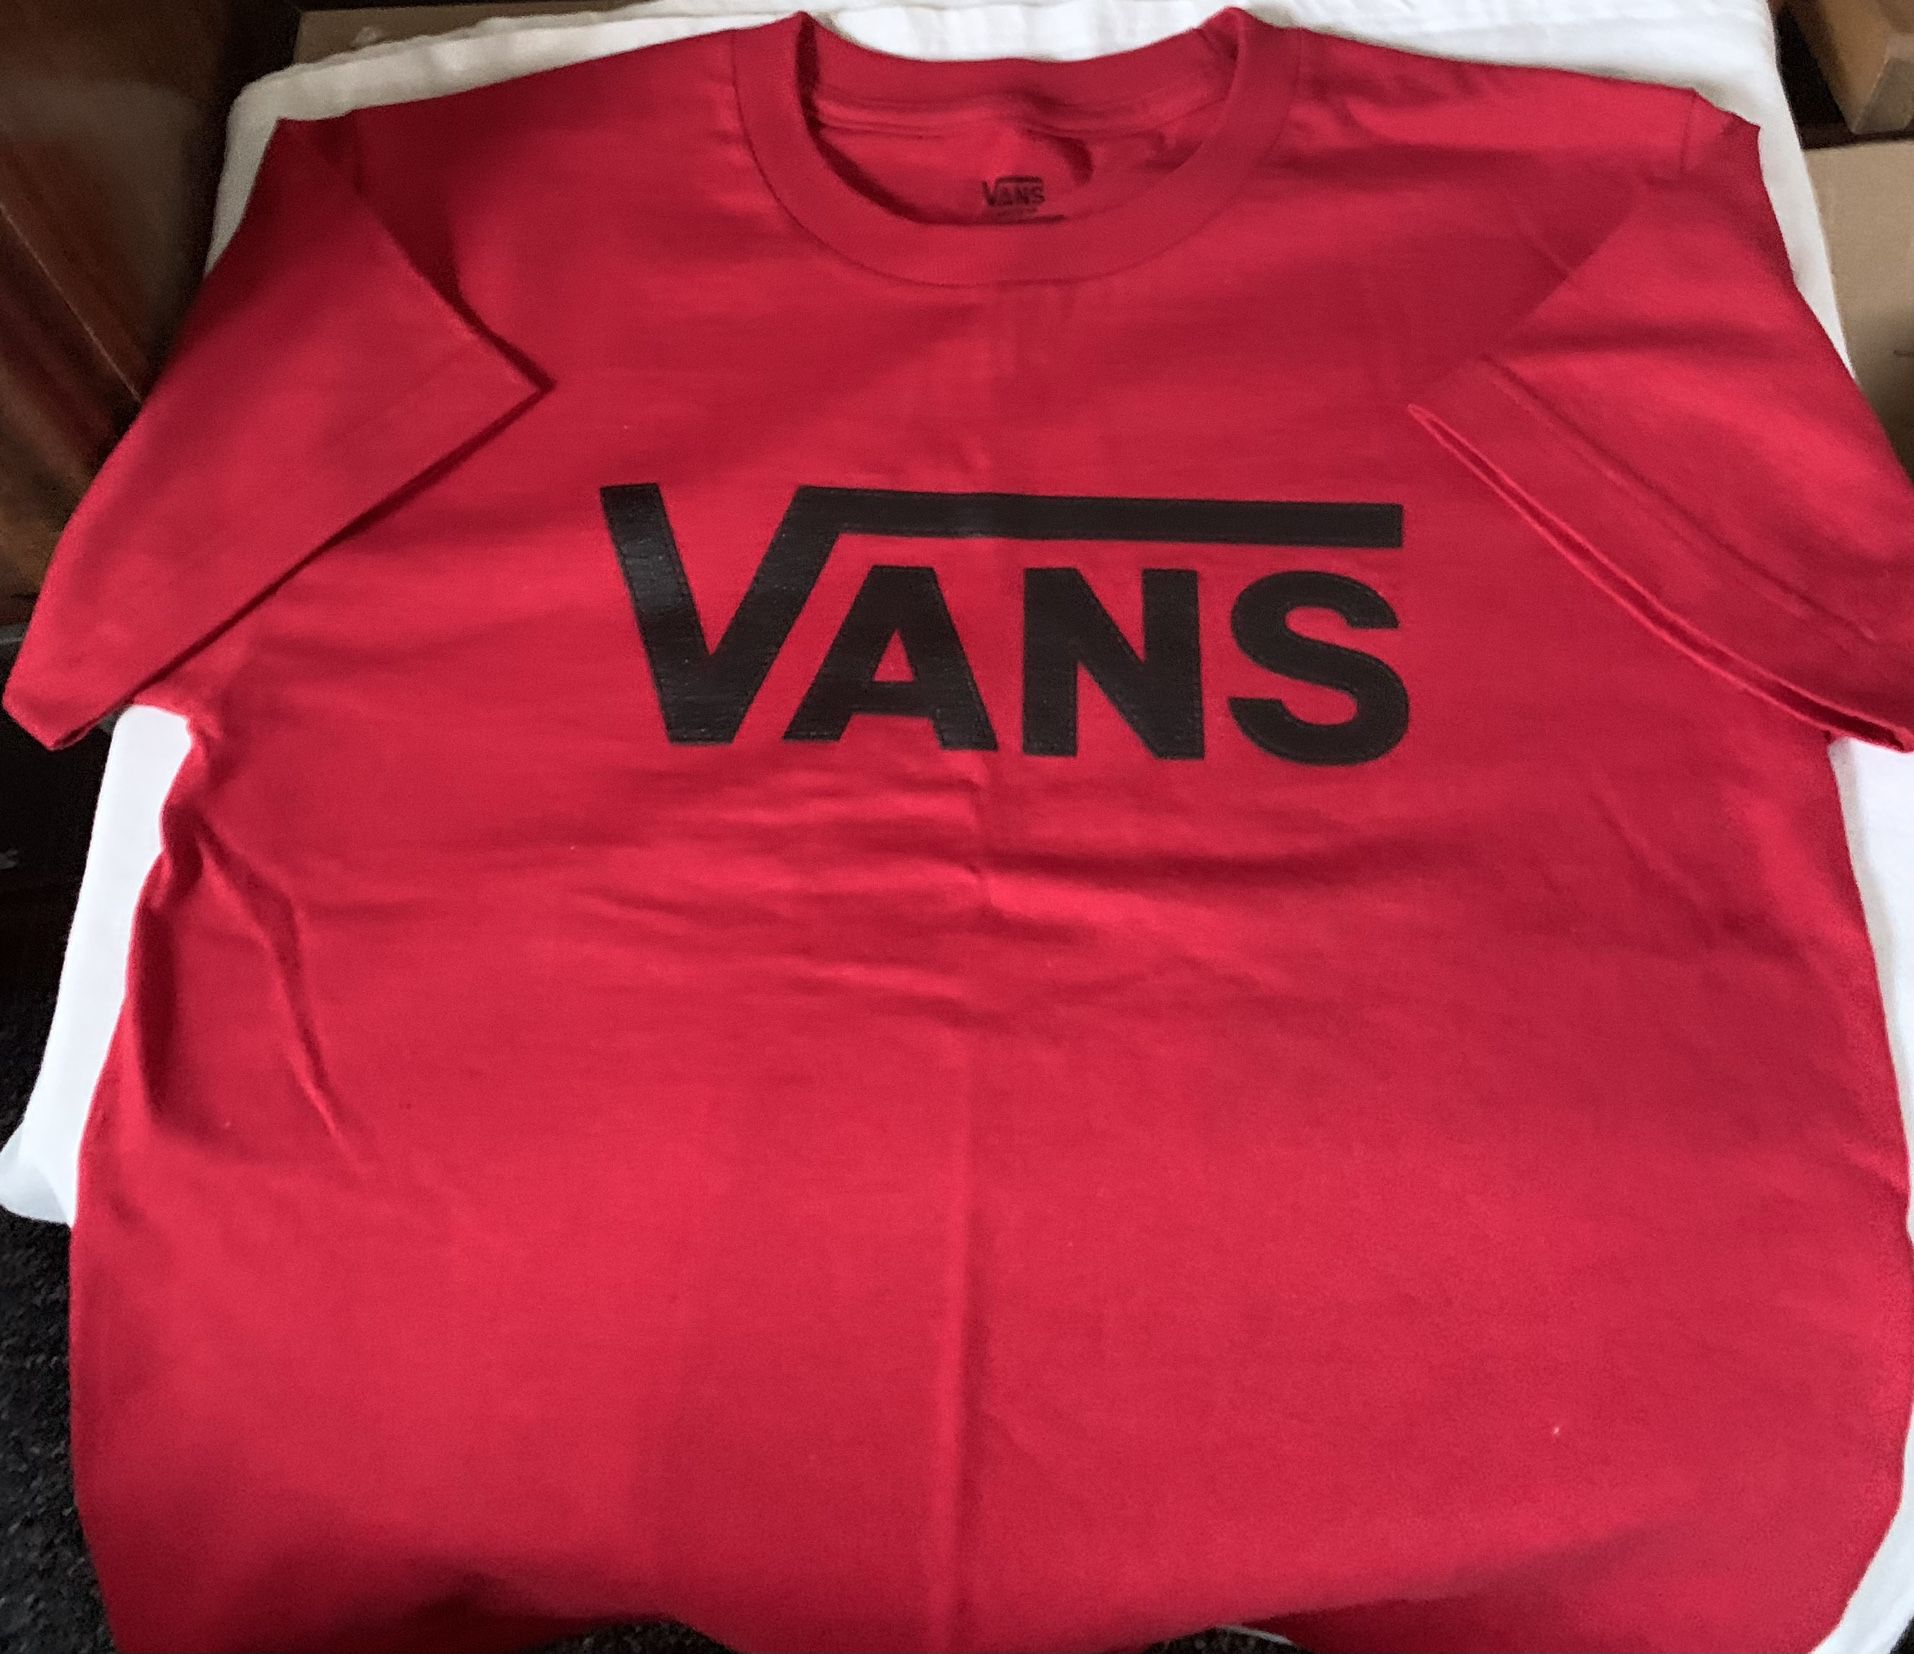 Small Youth Van t-shirt Maybe Size 8-10